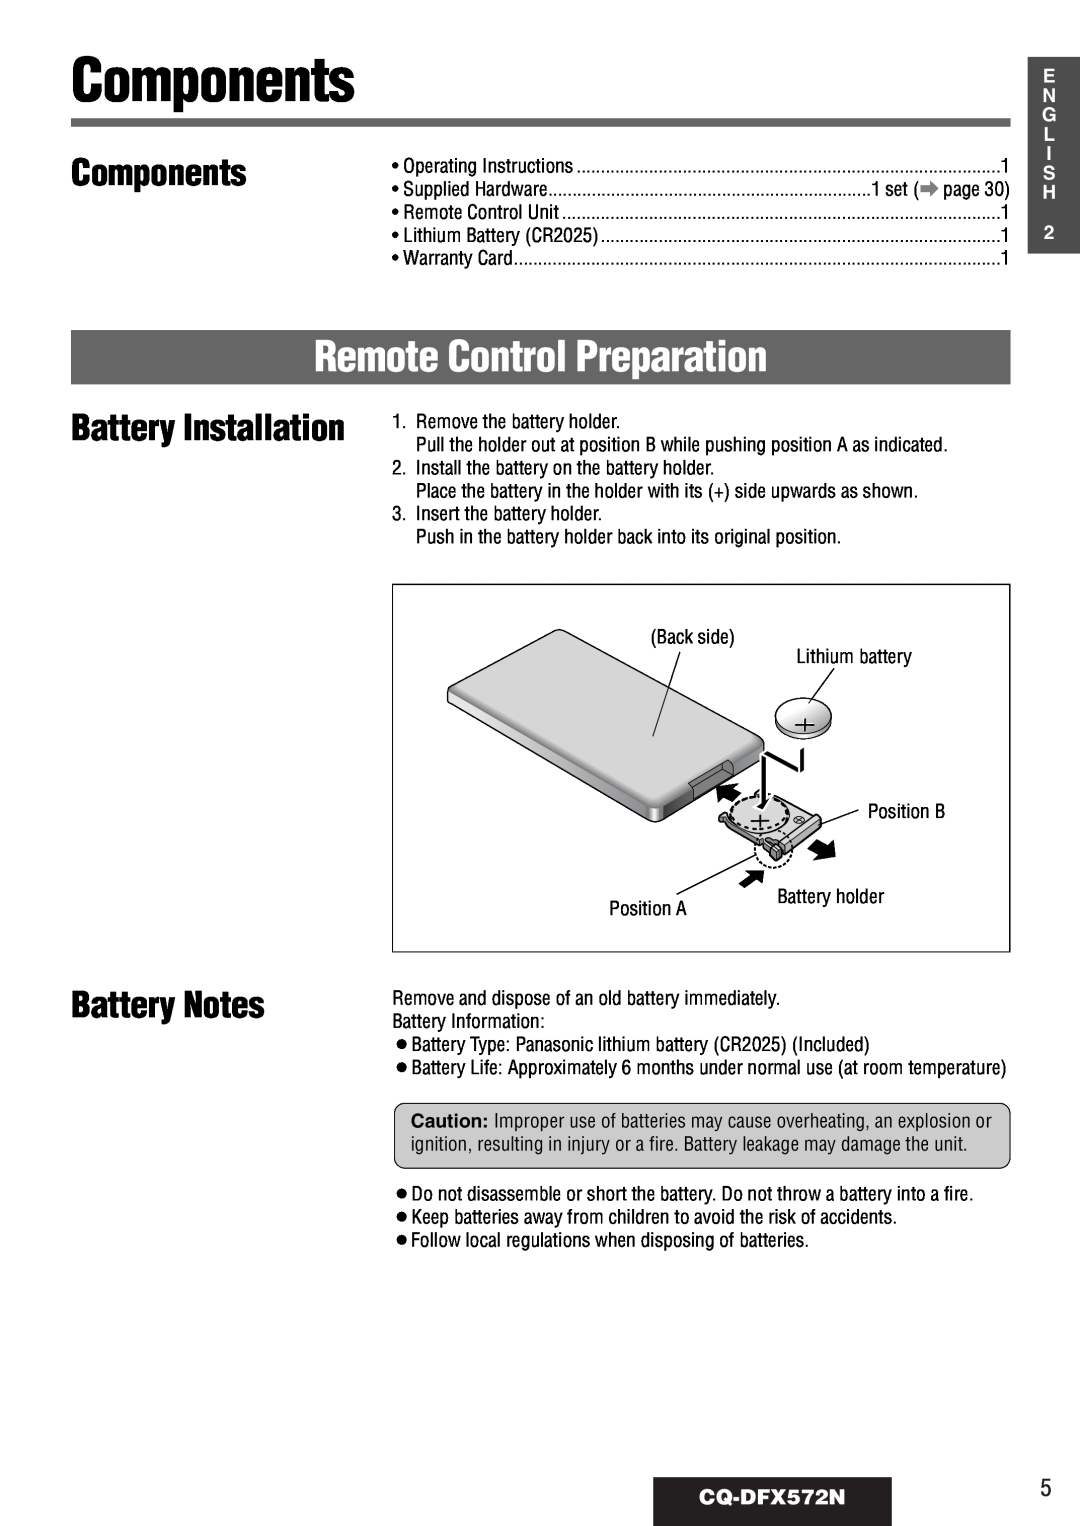 Panasonic Remote Control Preparation, Components, Battery Notes, Battery Installation, CQ-DFX572N5, E N G L I S H 